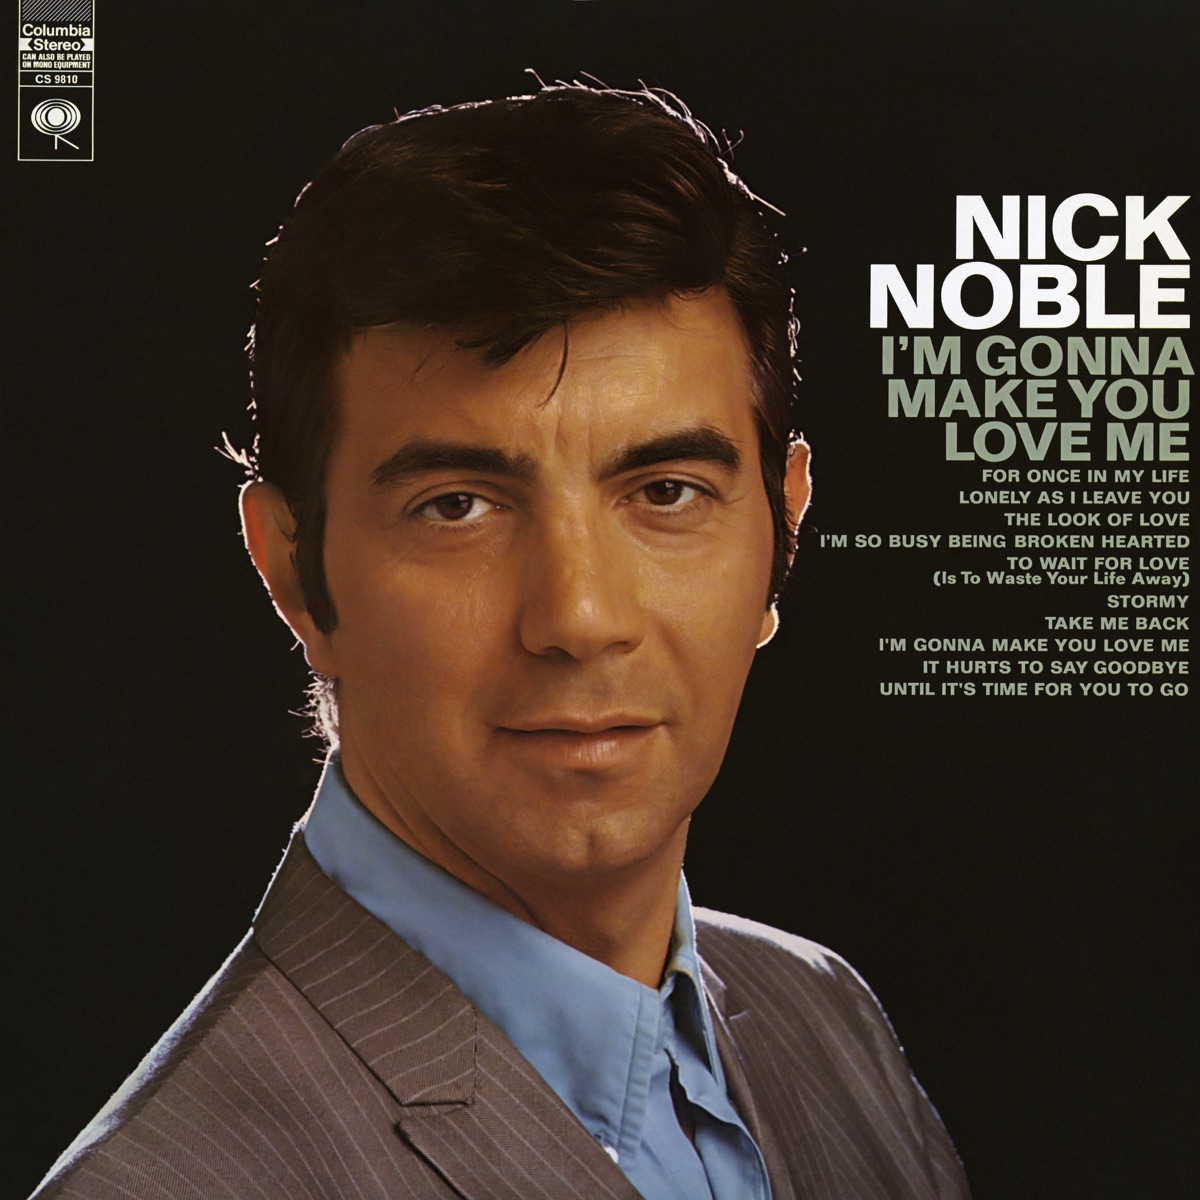 I'm Gonna Make You Love Me - Album by Nick Noble - Apple Music